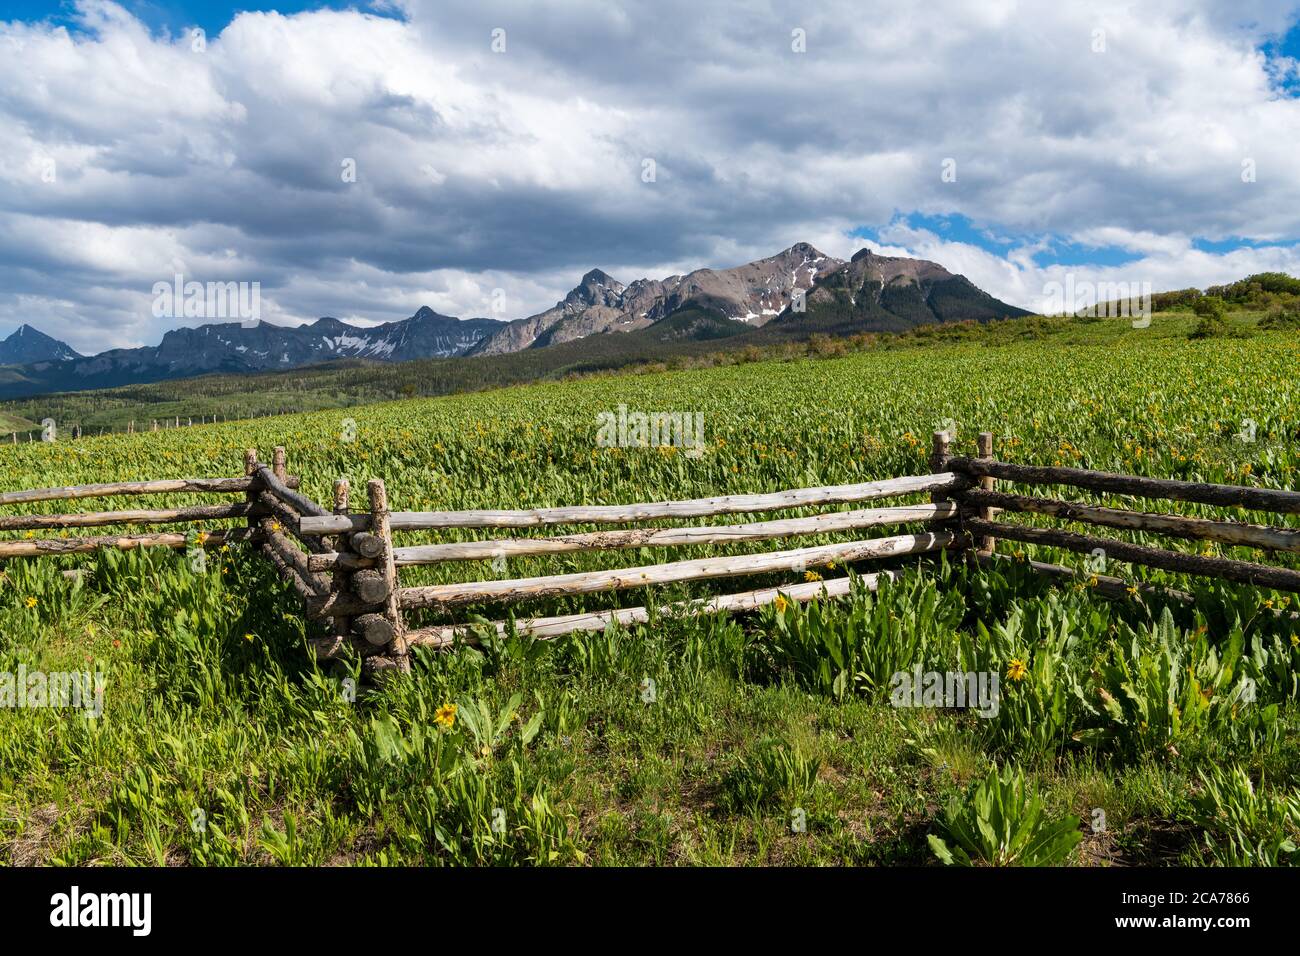 Field of yellow sunflowers and a zig zag rustic wood log fence on a ranch below the snow-capped Colorado Rocky Mountains Stock Photo